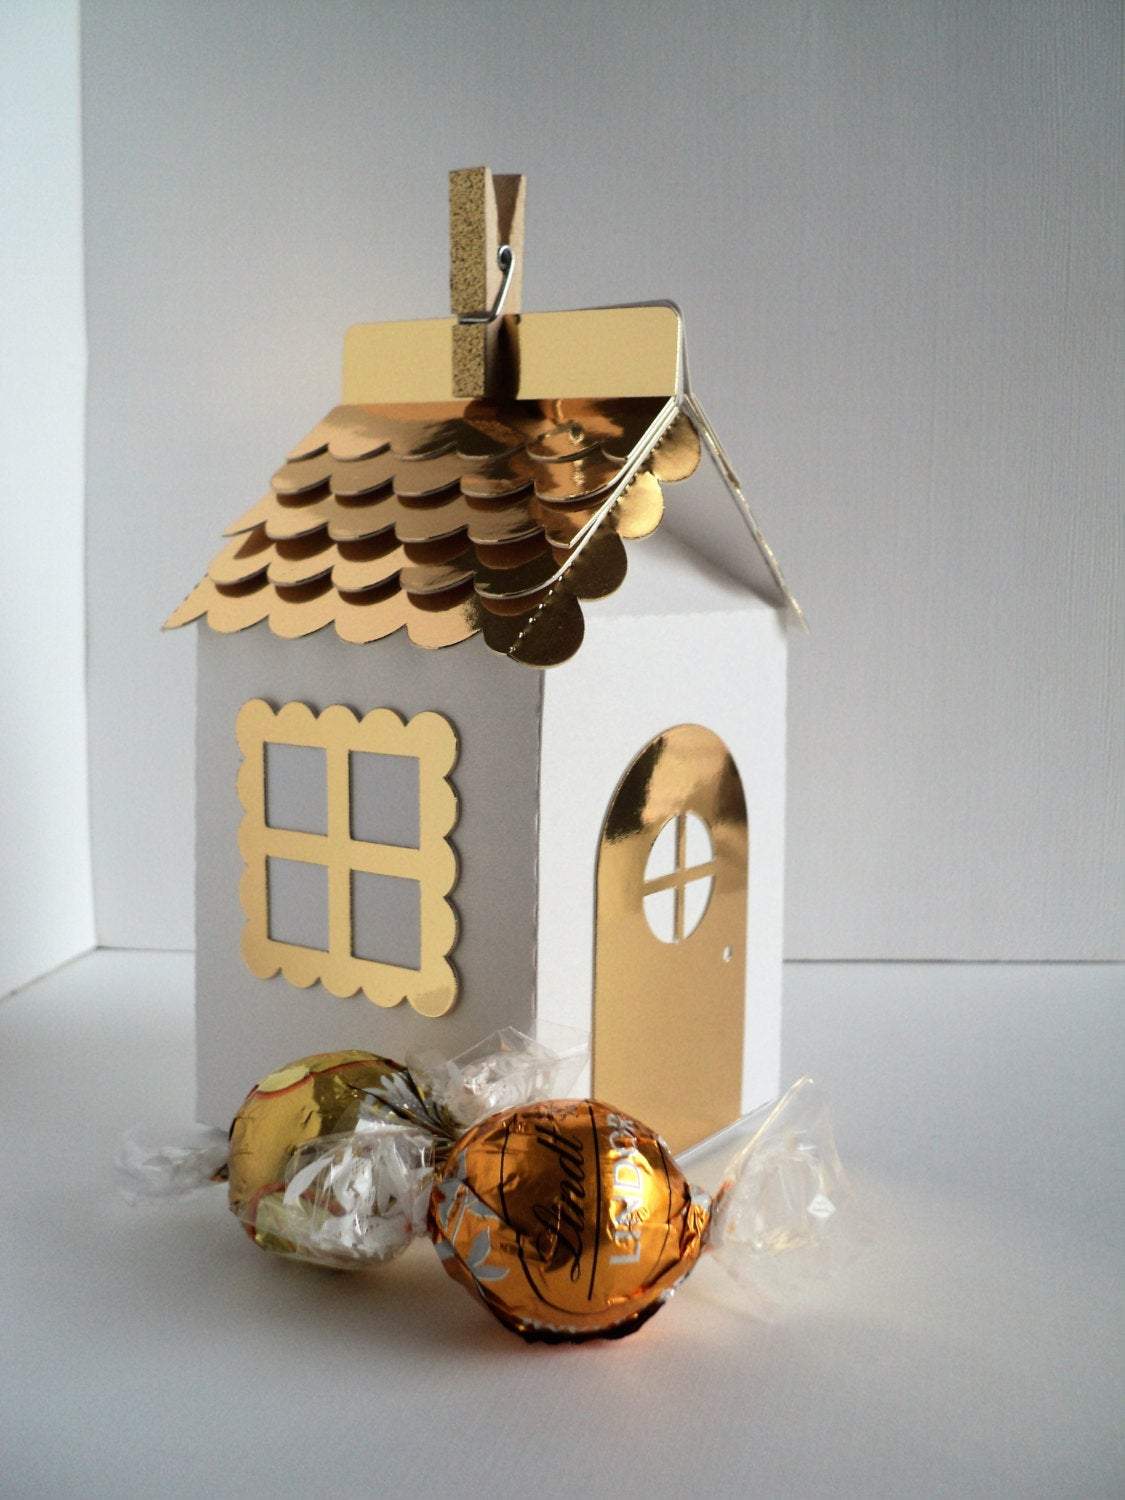 Adriana Ortiz Designs Favor Boxes Gold Little House Christmas Boxes.